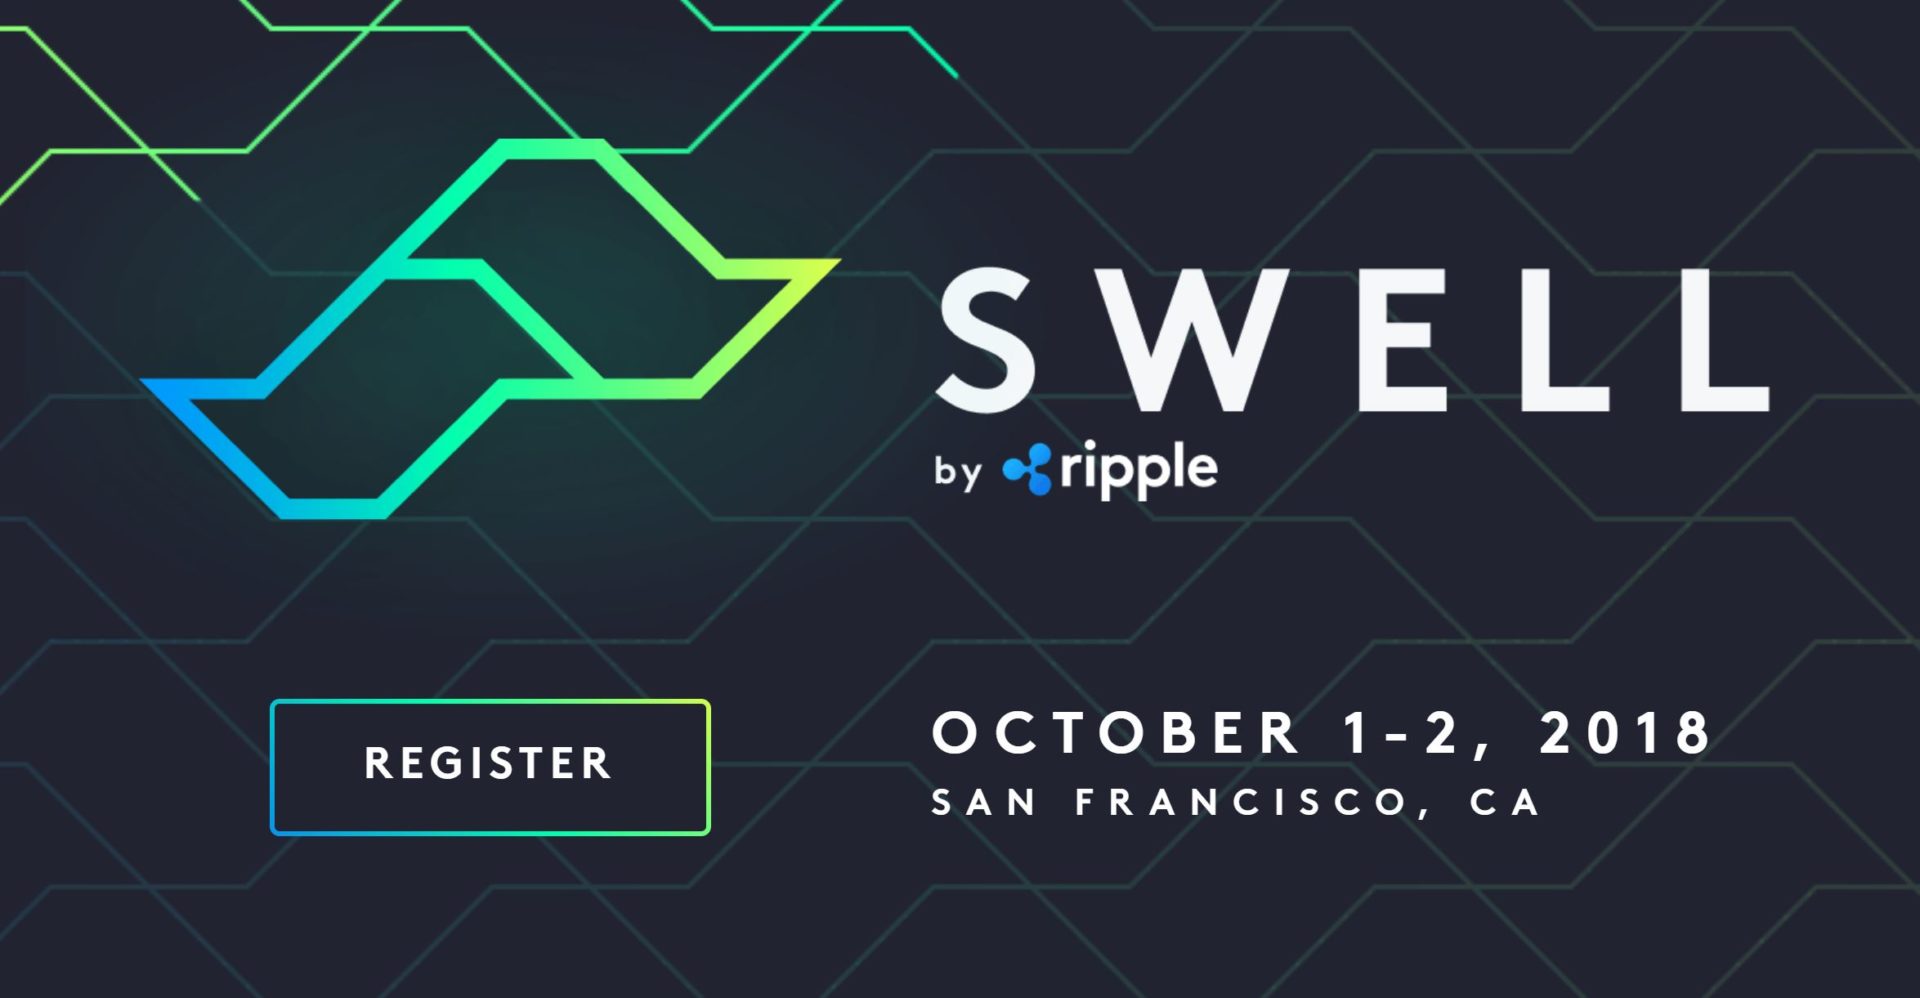 Will The Swell Event Usher in a New Era For XRP in the Markets?